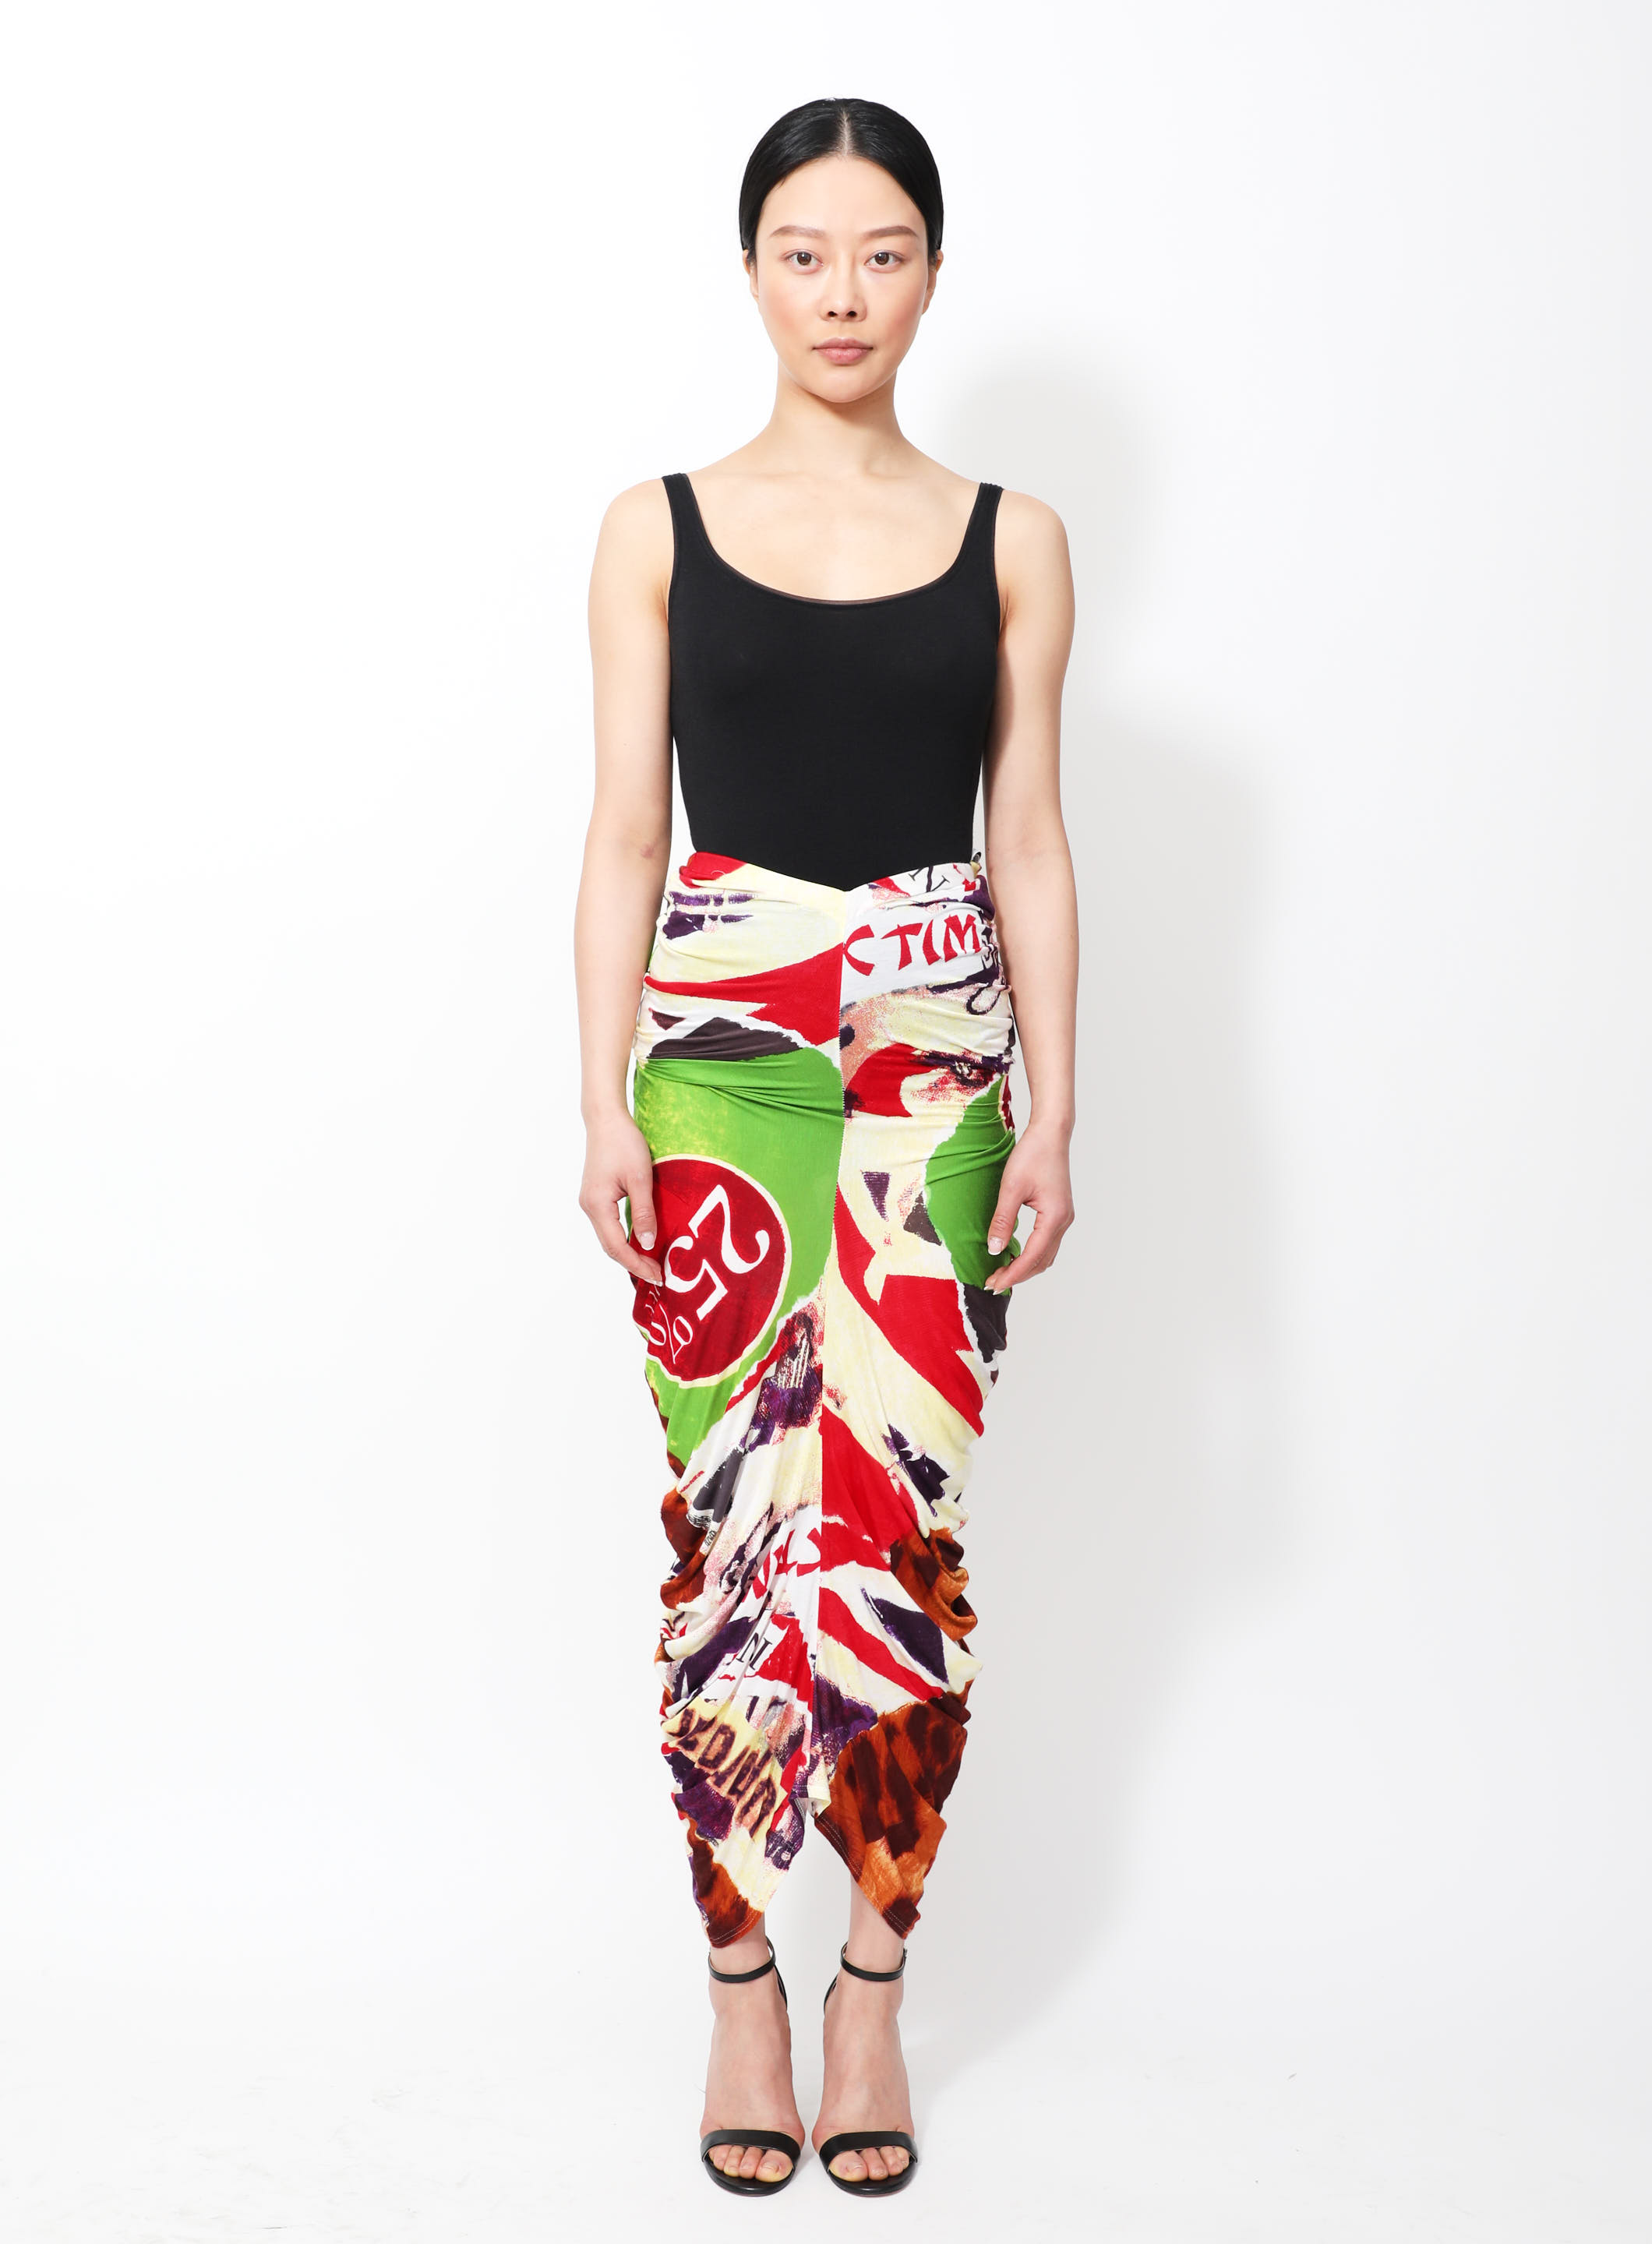 Iconic S/S 2003 'Fashion Victim' Skirt | Authentic & Vintage | ReSEE